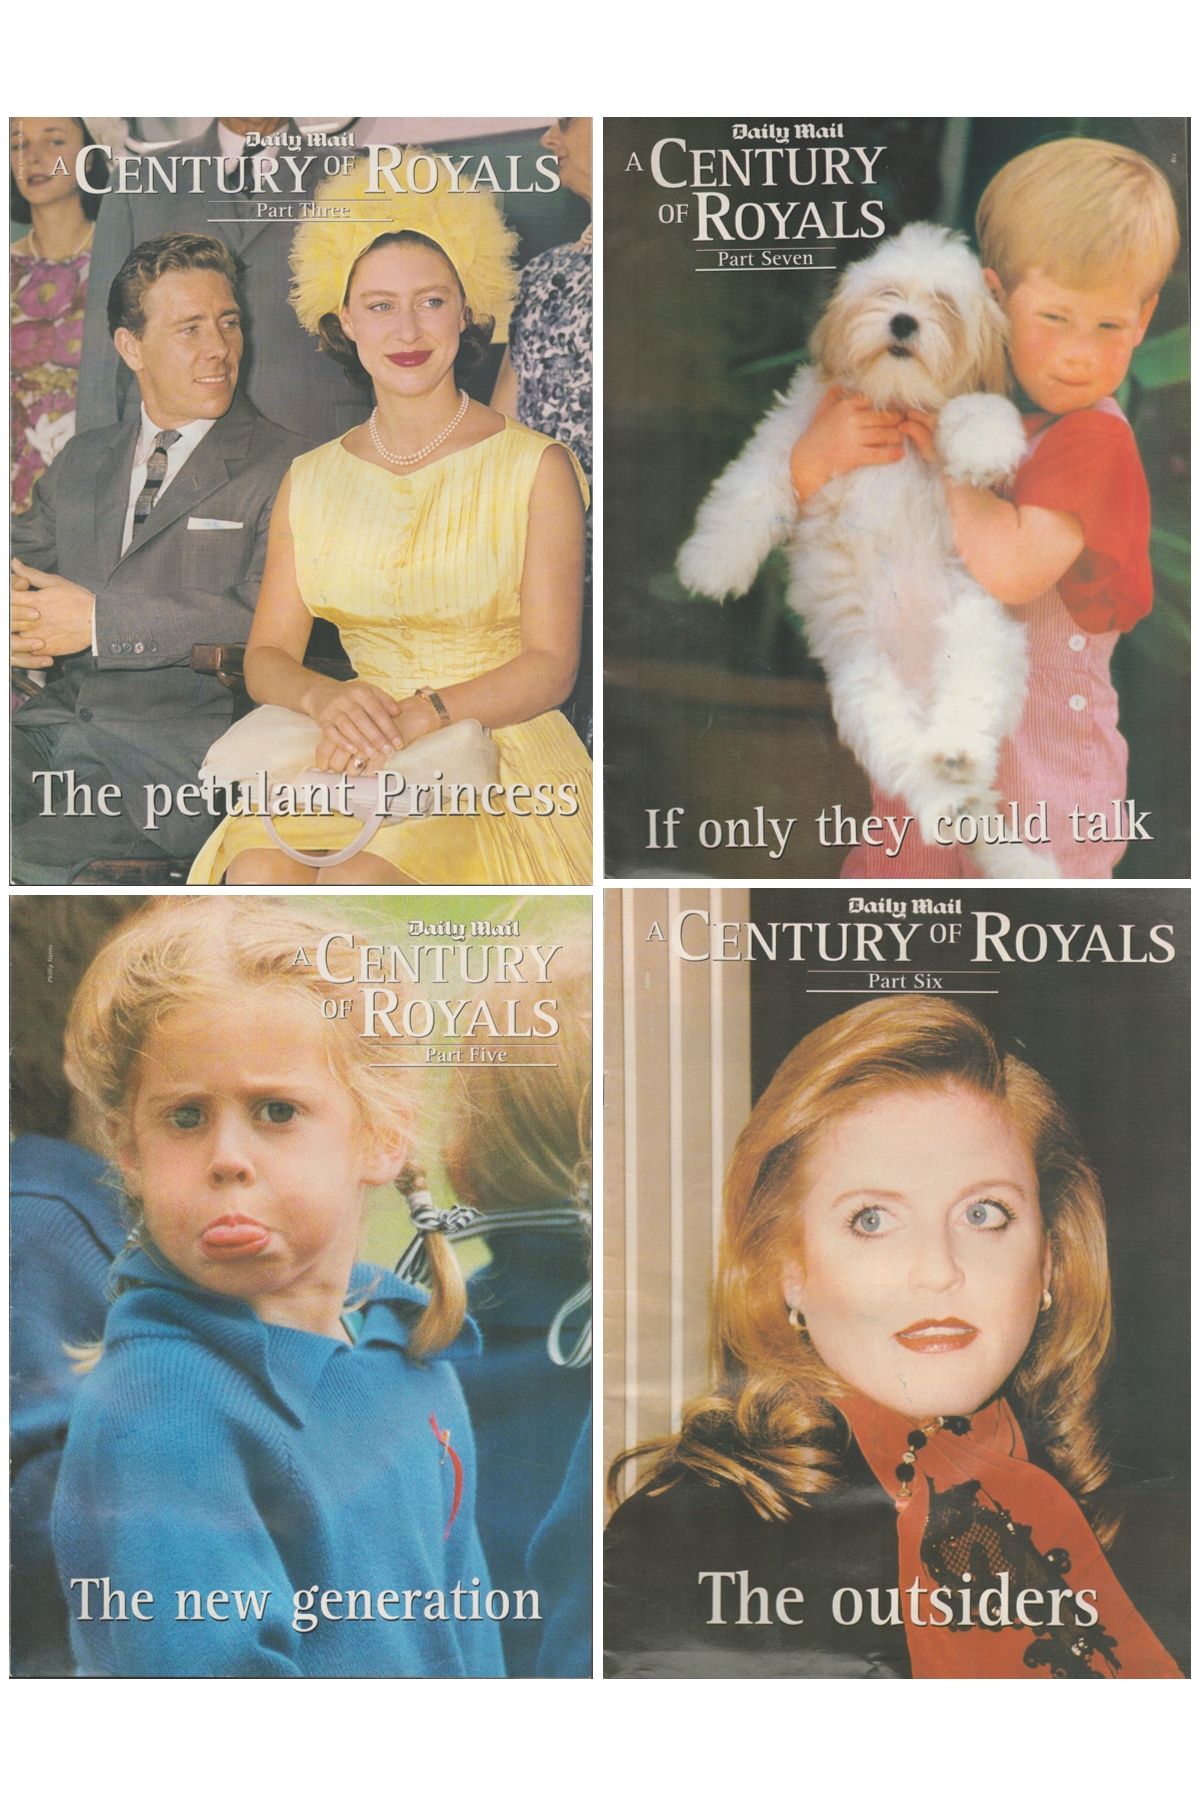 Century Of Royals magazine collection by The Daily Mail, 10 in total including all issues part 1 10. - Image 4 of 6